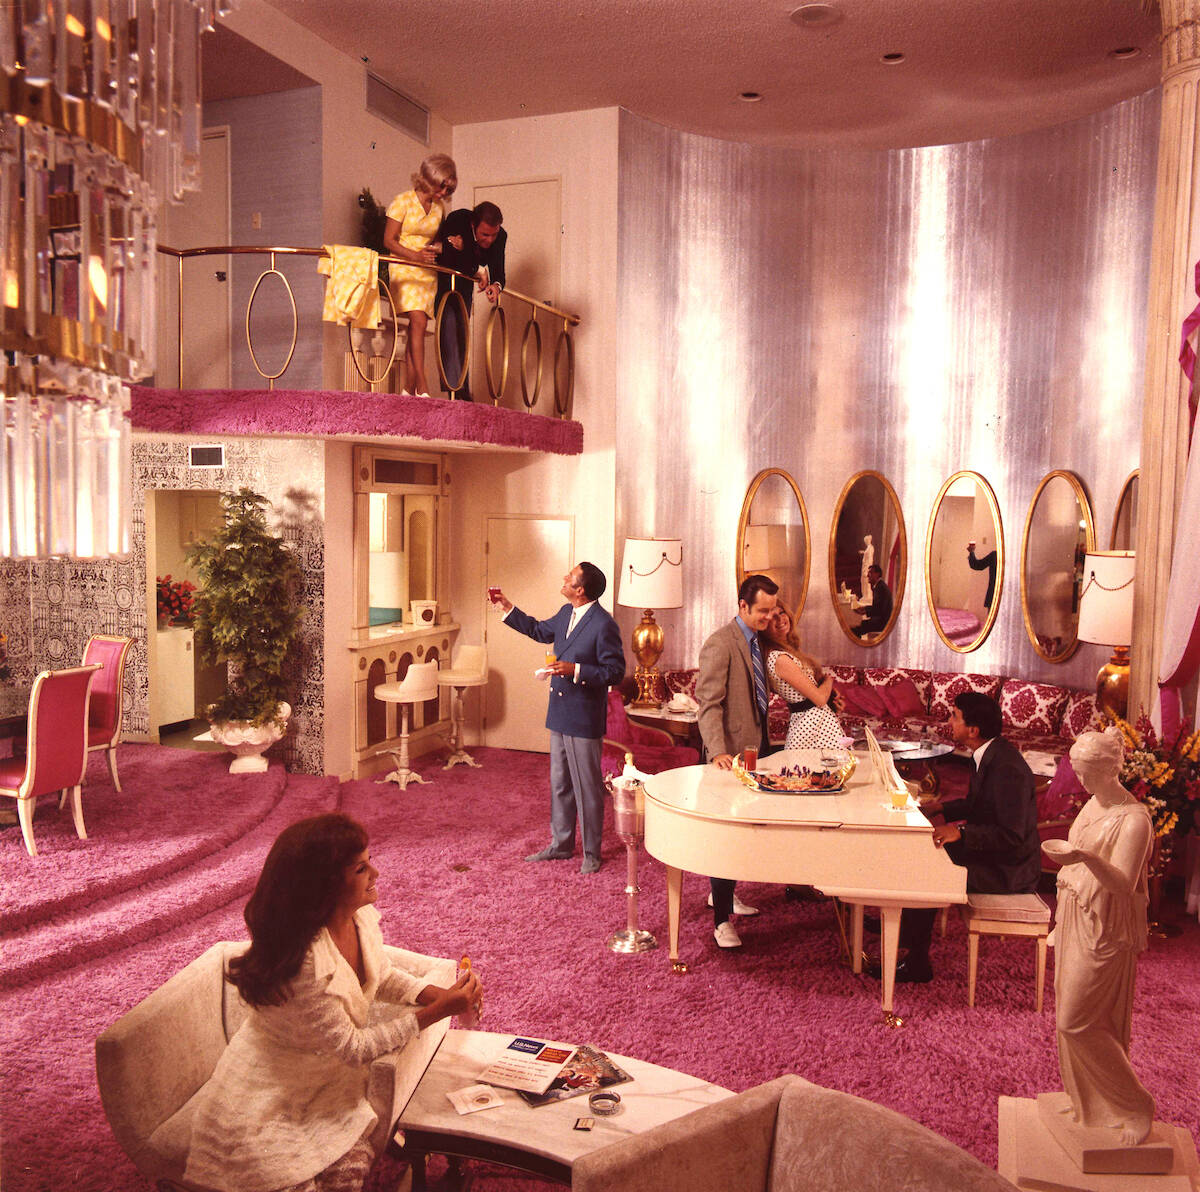 The furniture design at Caesars Palace in 1966 represents Rococo Modernism, a style common duri ...